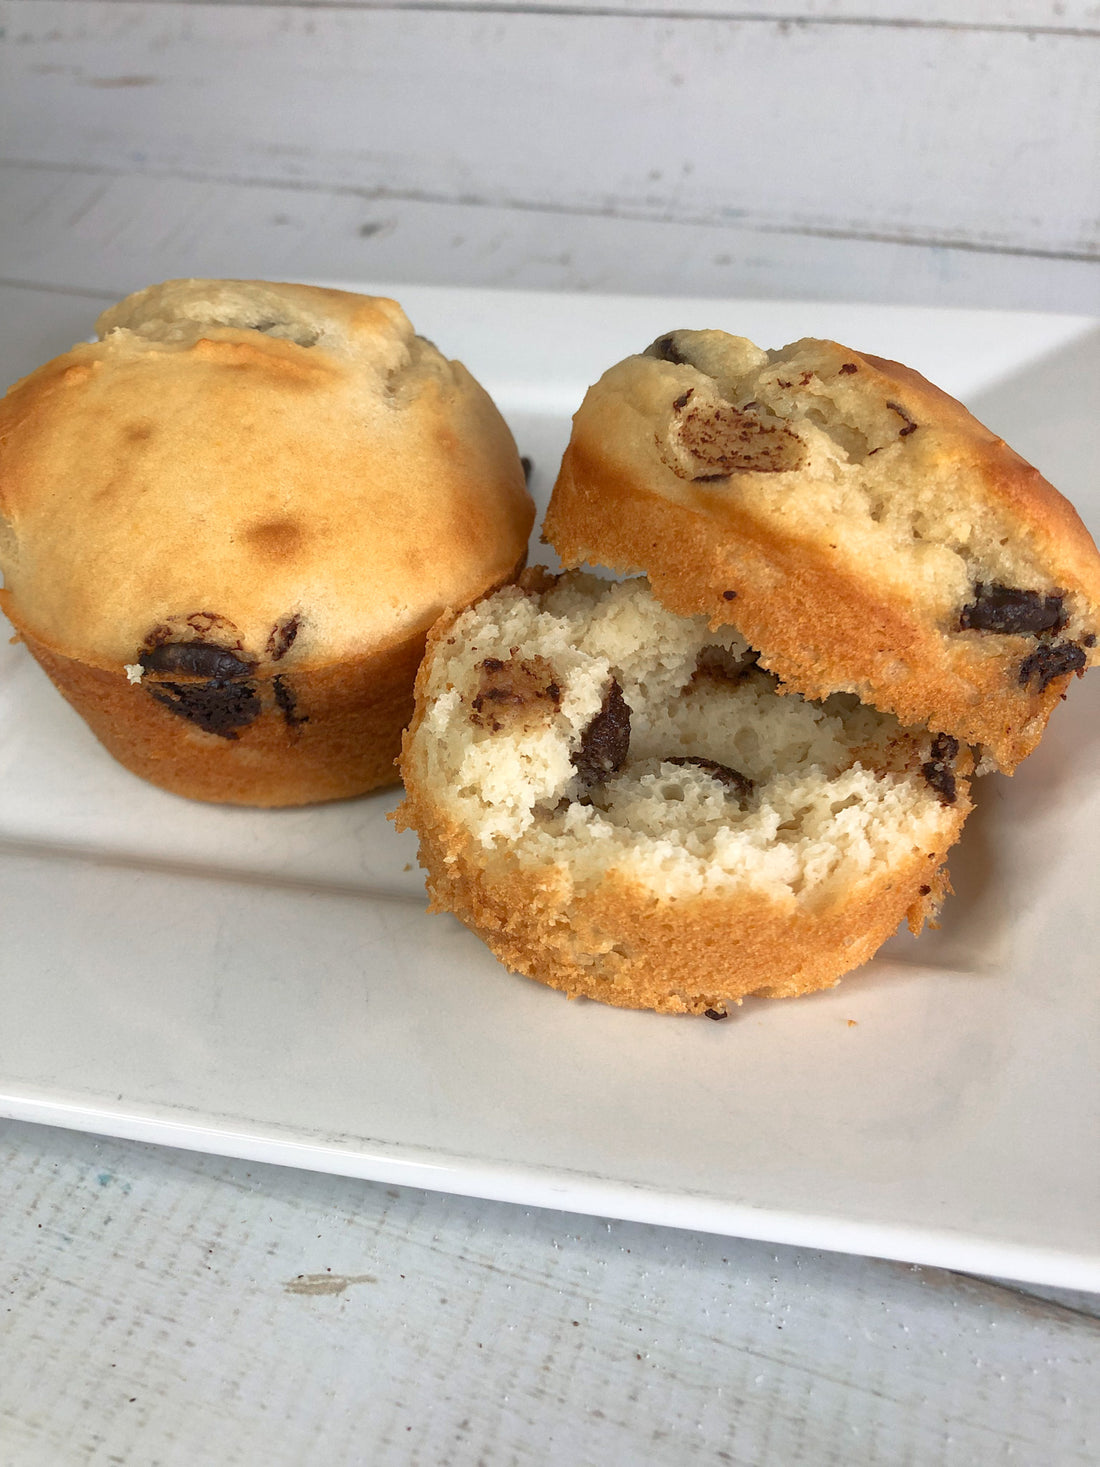 Low Carb Chocolate Chip Muffins